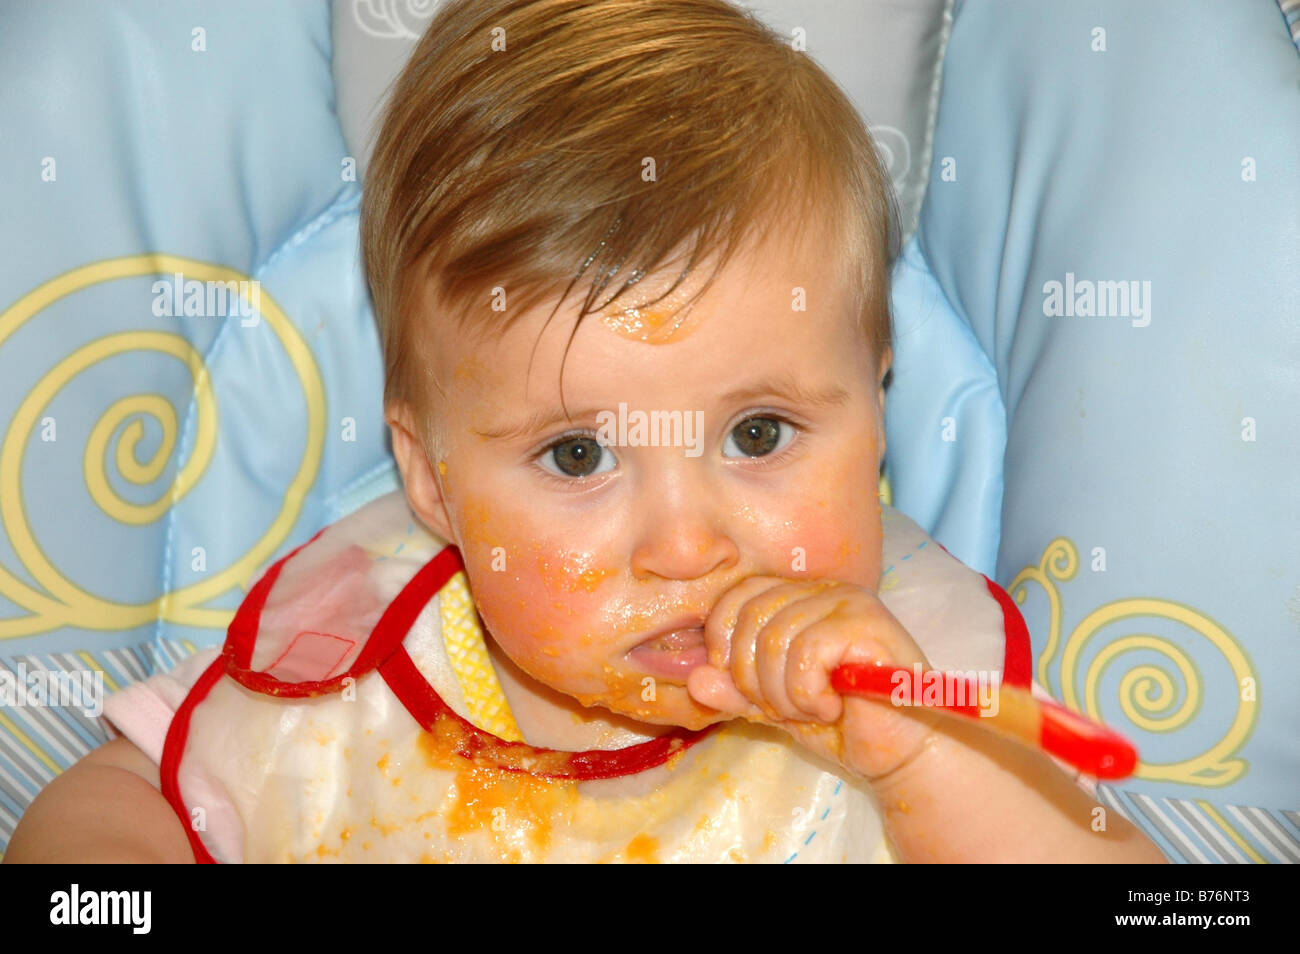 baby girl child intense look point finger Stock Photo